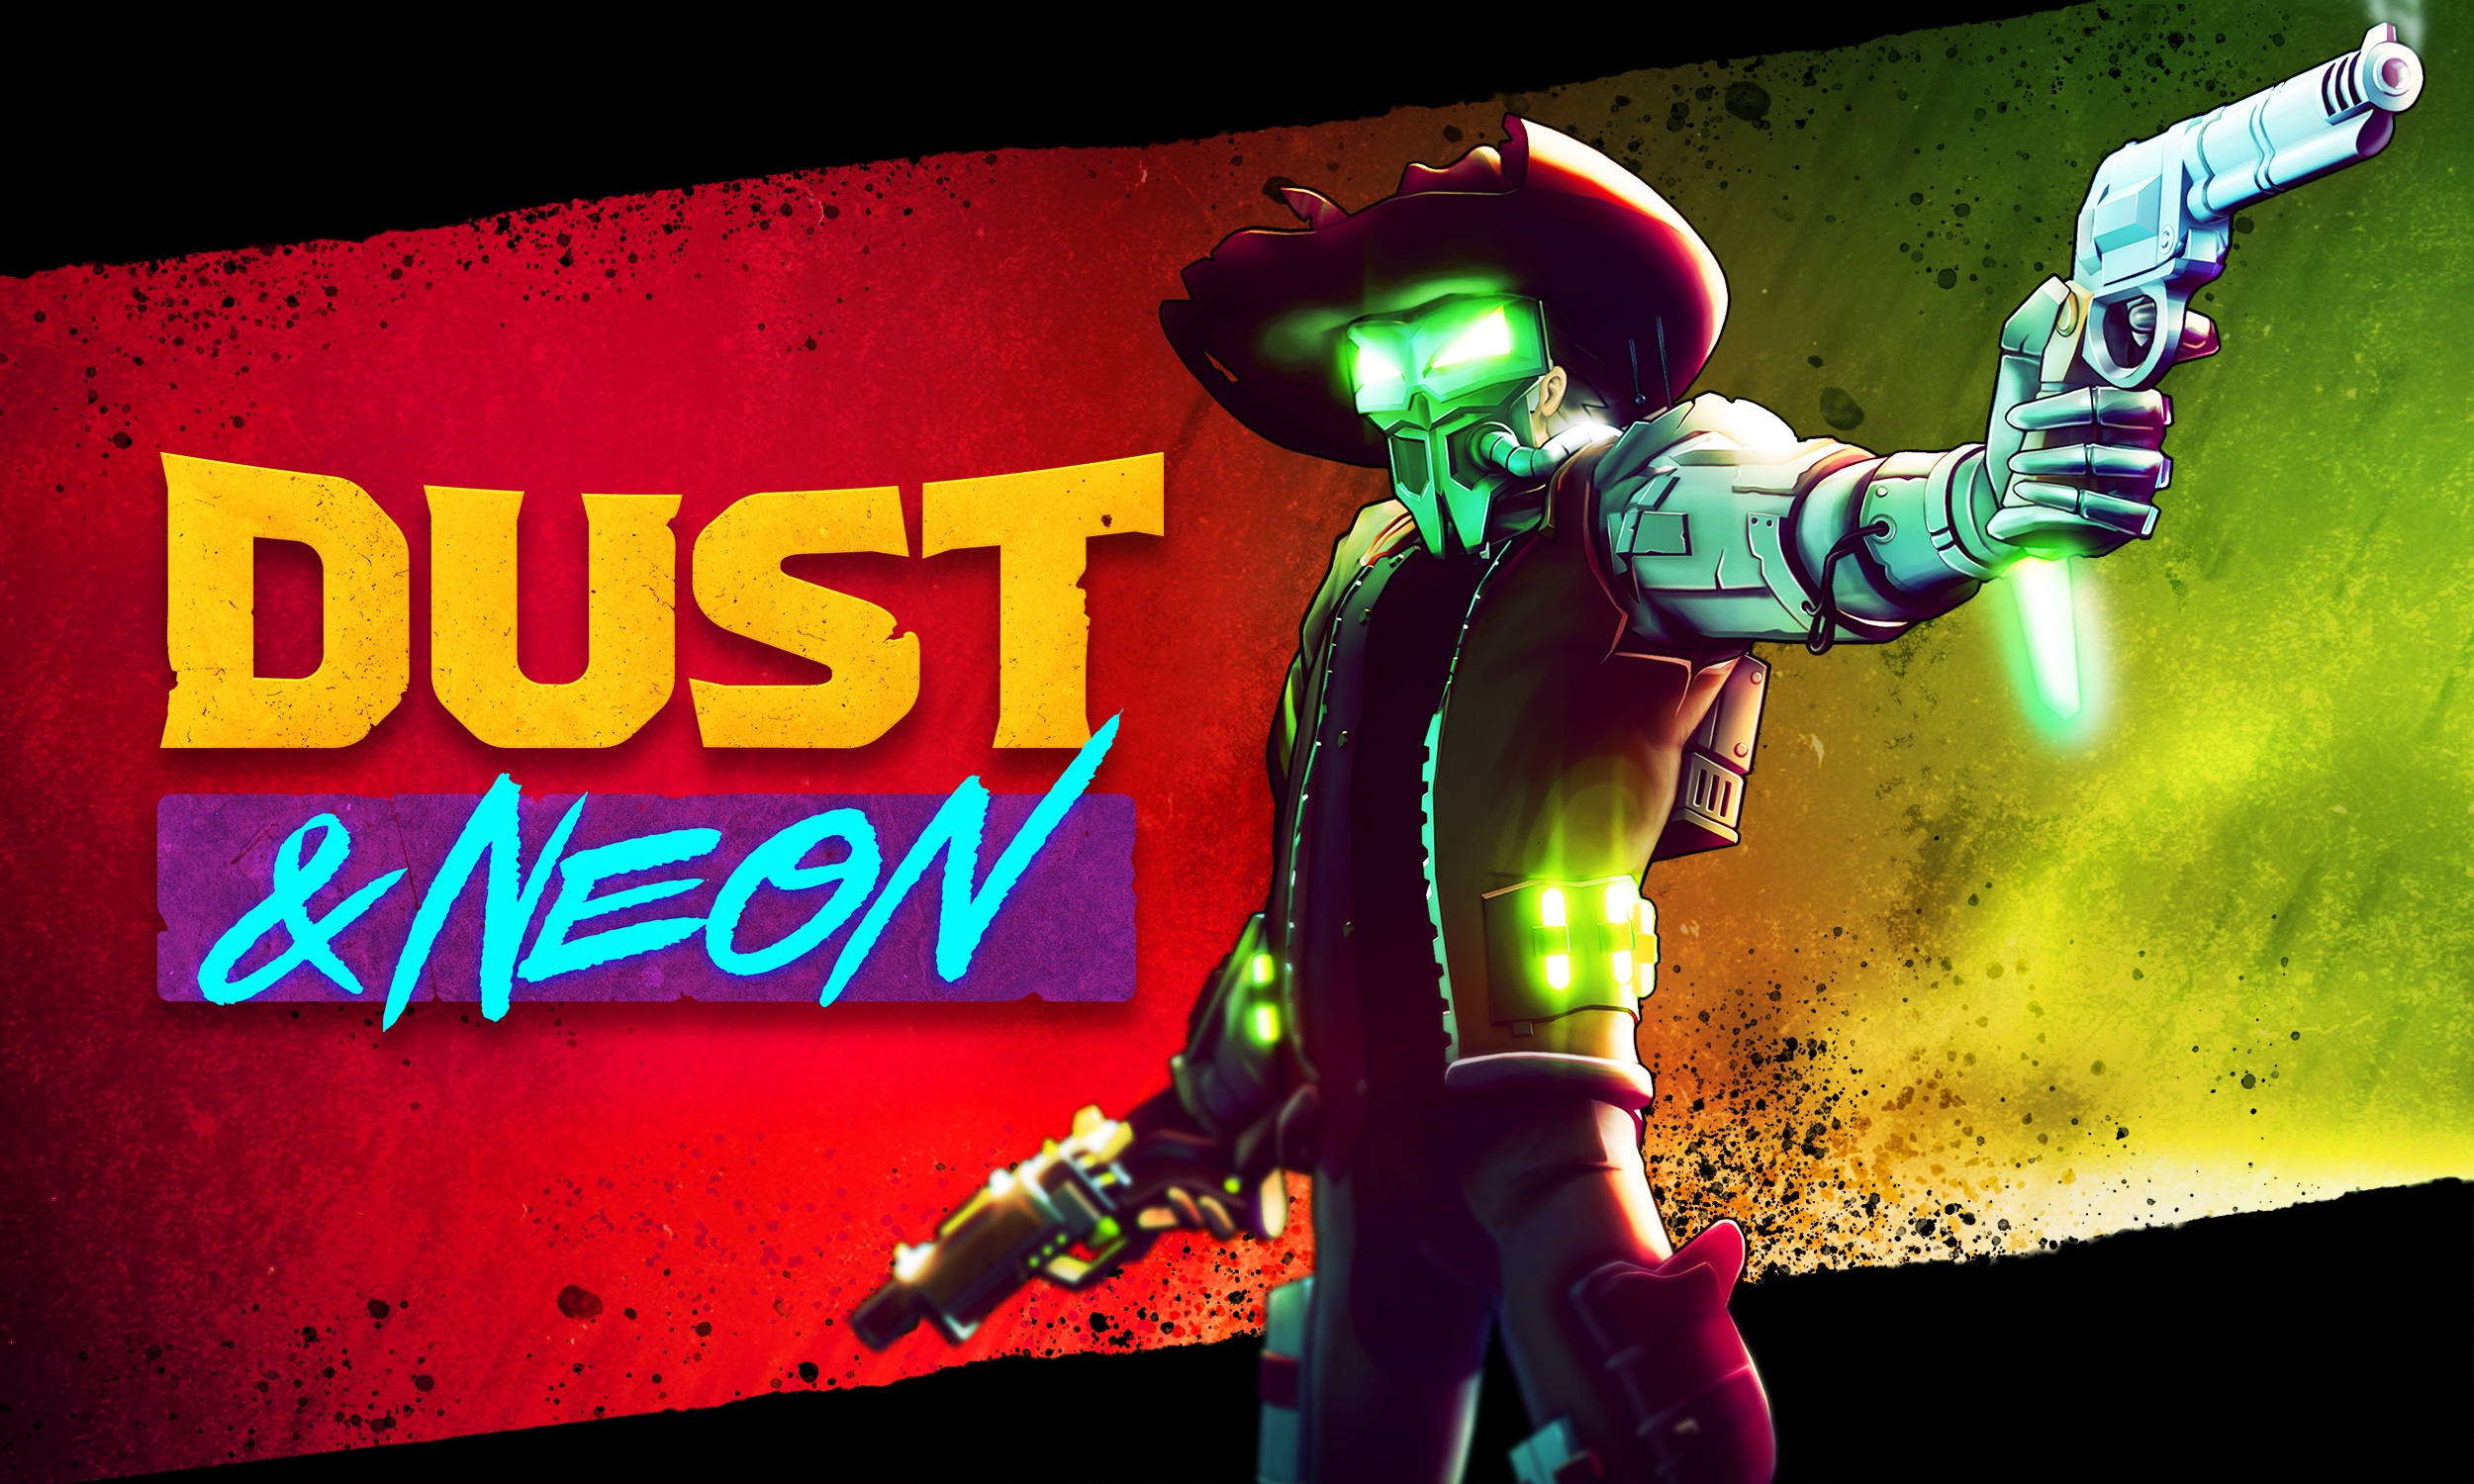 Dust & Neon launching on February 16th